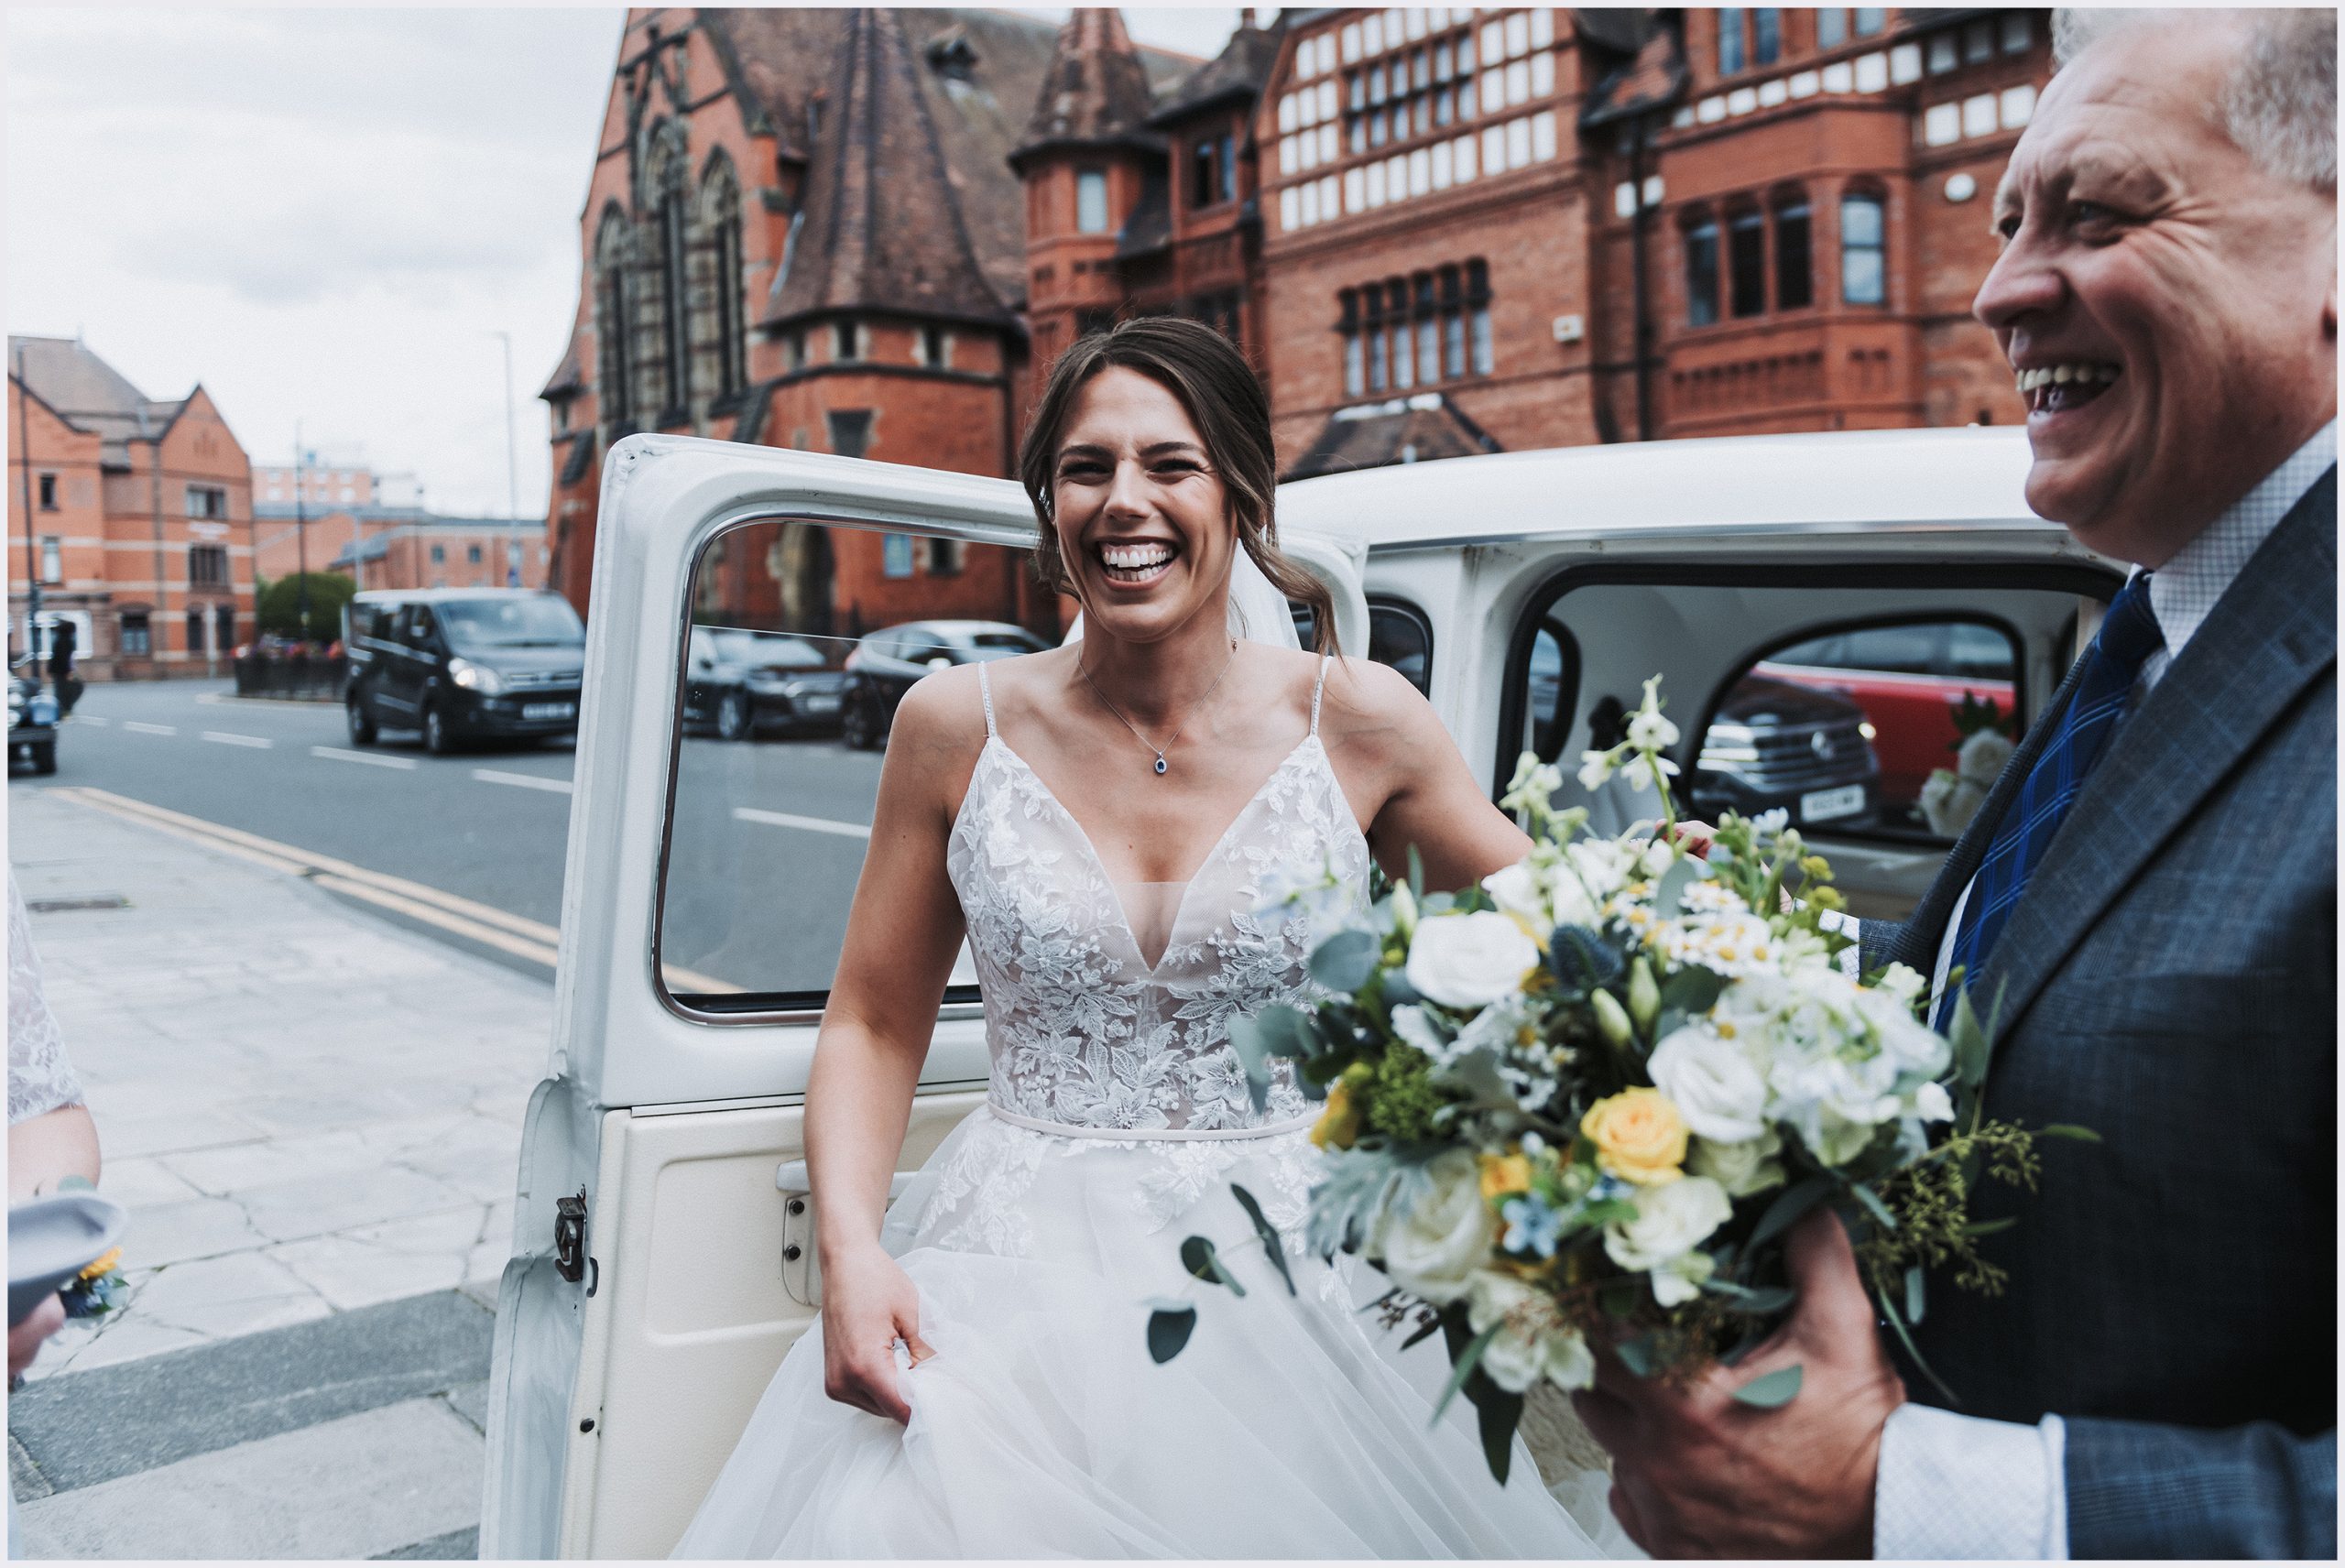 A beautiful smiling bride wearing her wedding gown steps out of the car that has brought her to the church to be married.  The driver helps her out carrying her bouquet.  Image captured by Helena Jayne Photography Chester wedding photographer